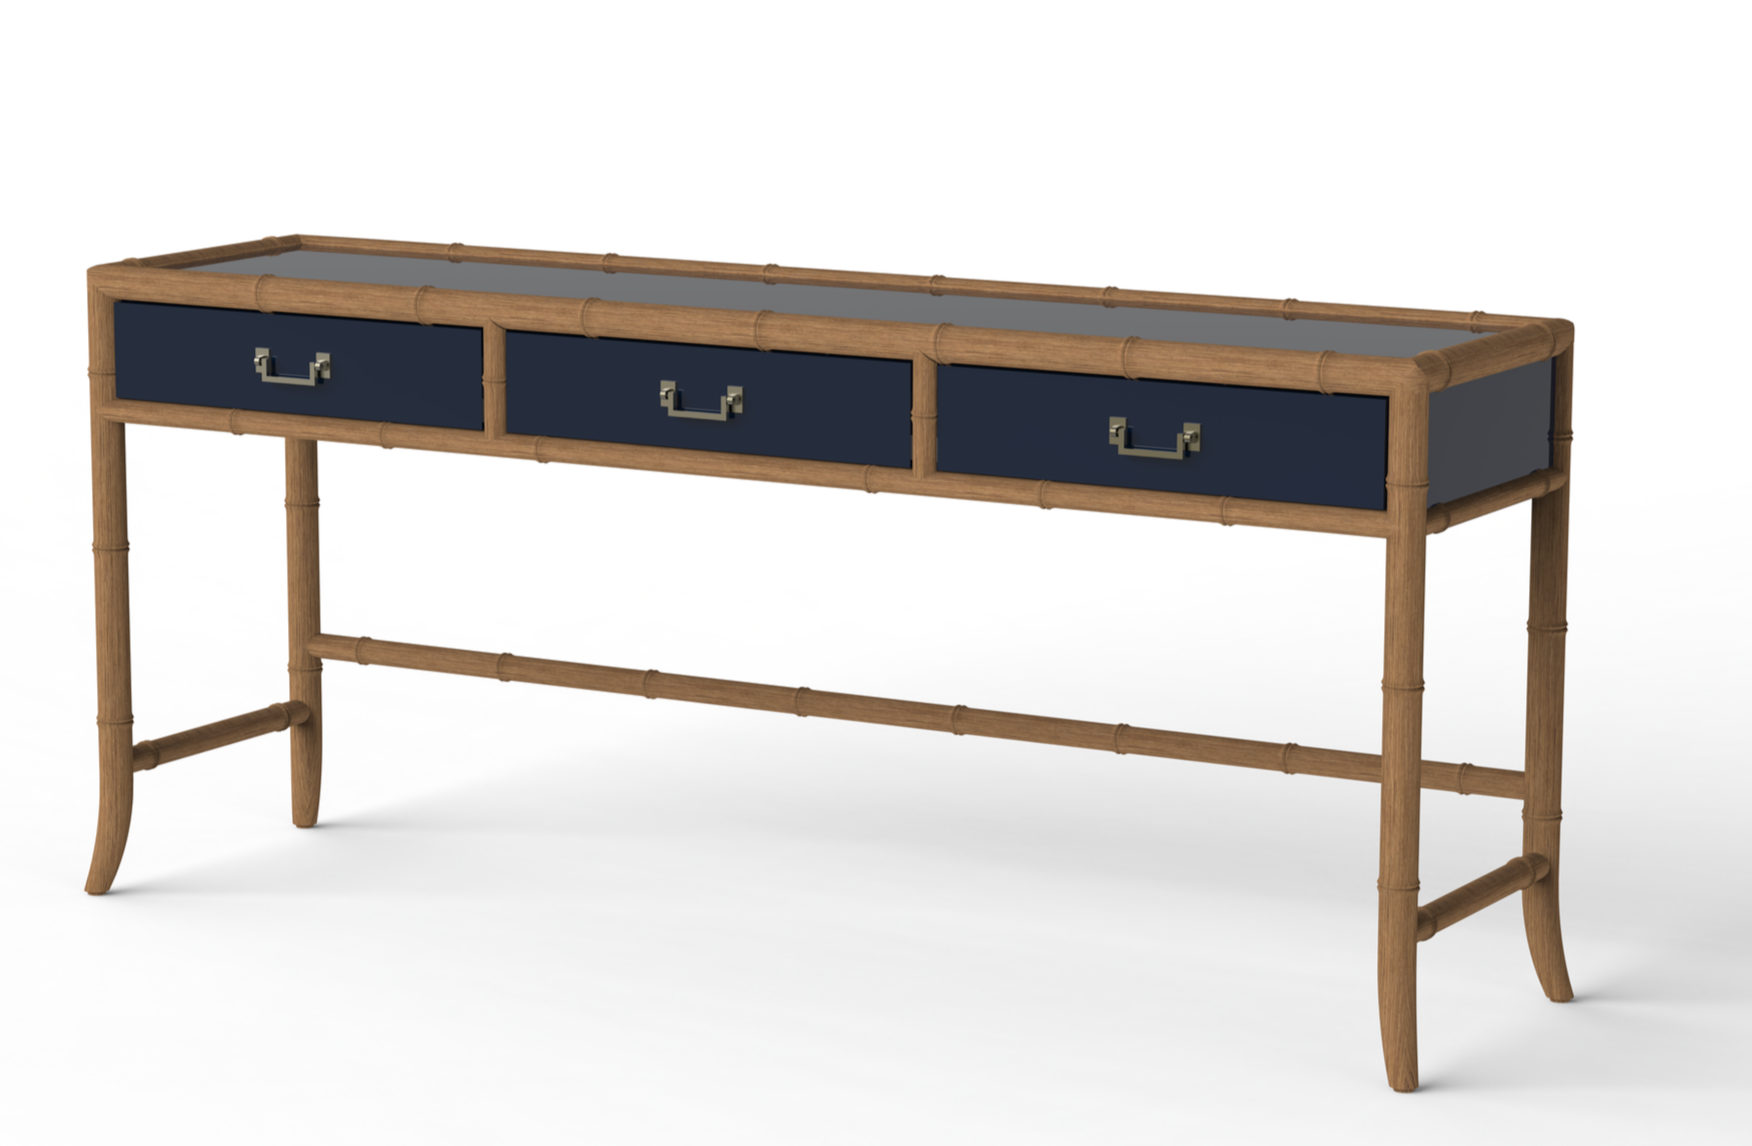 Colonial Console Table